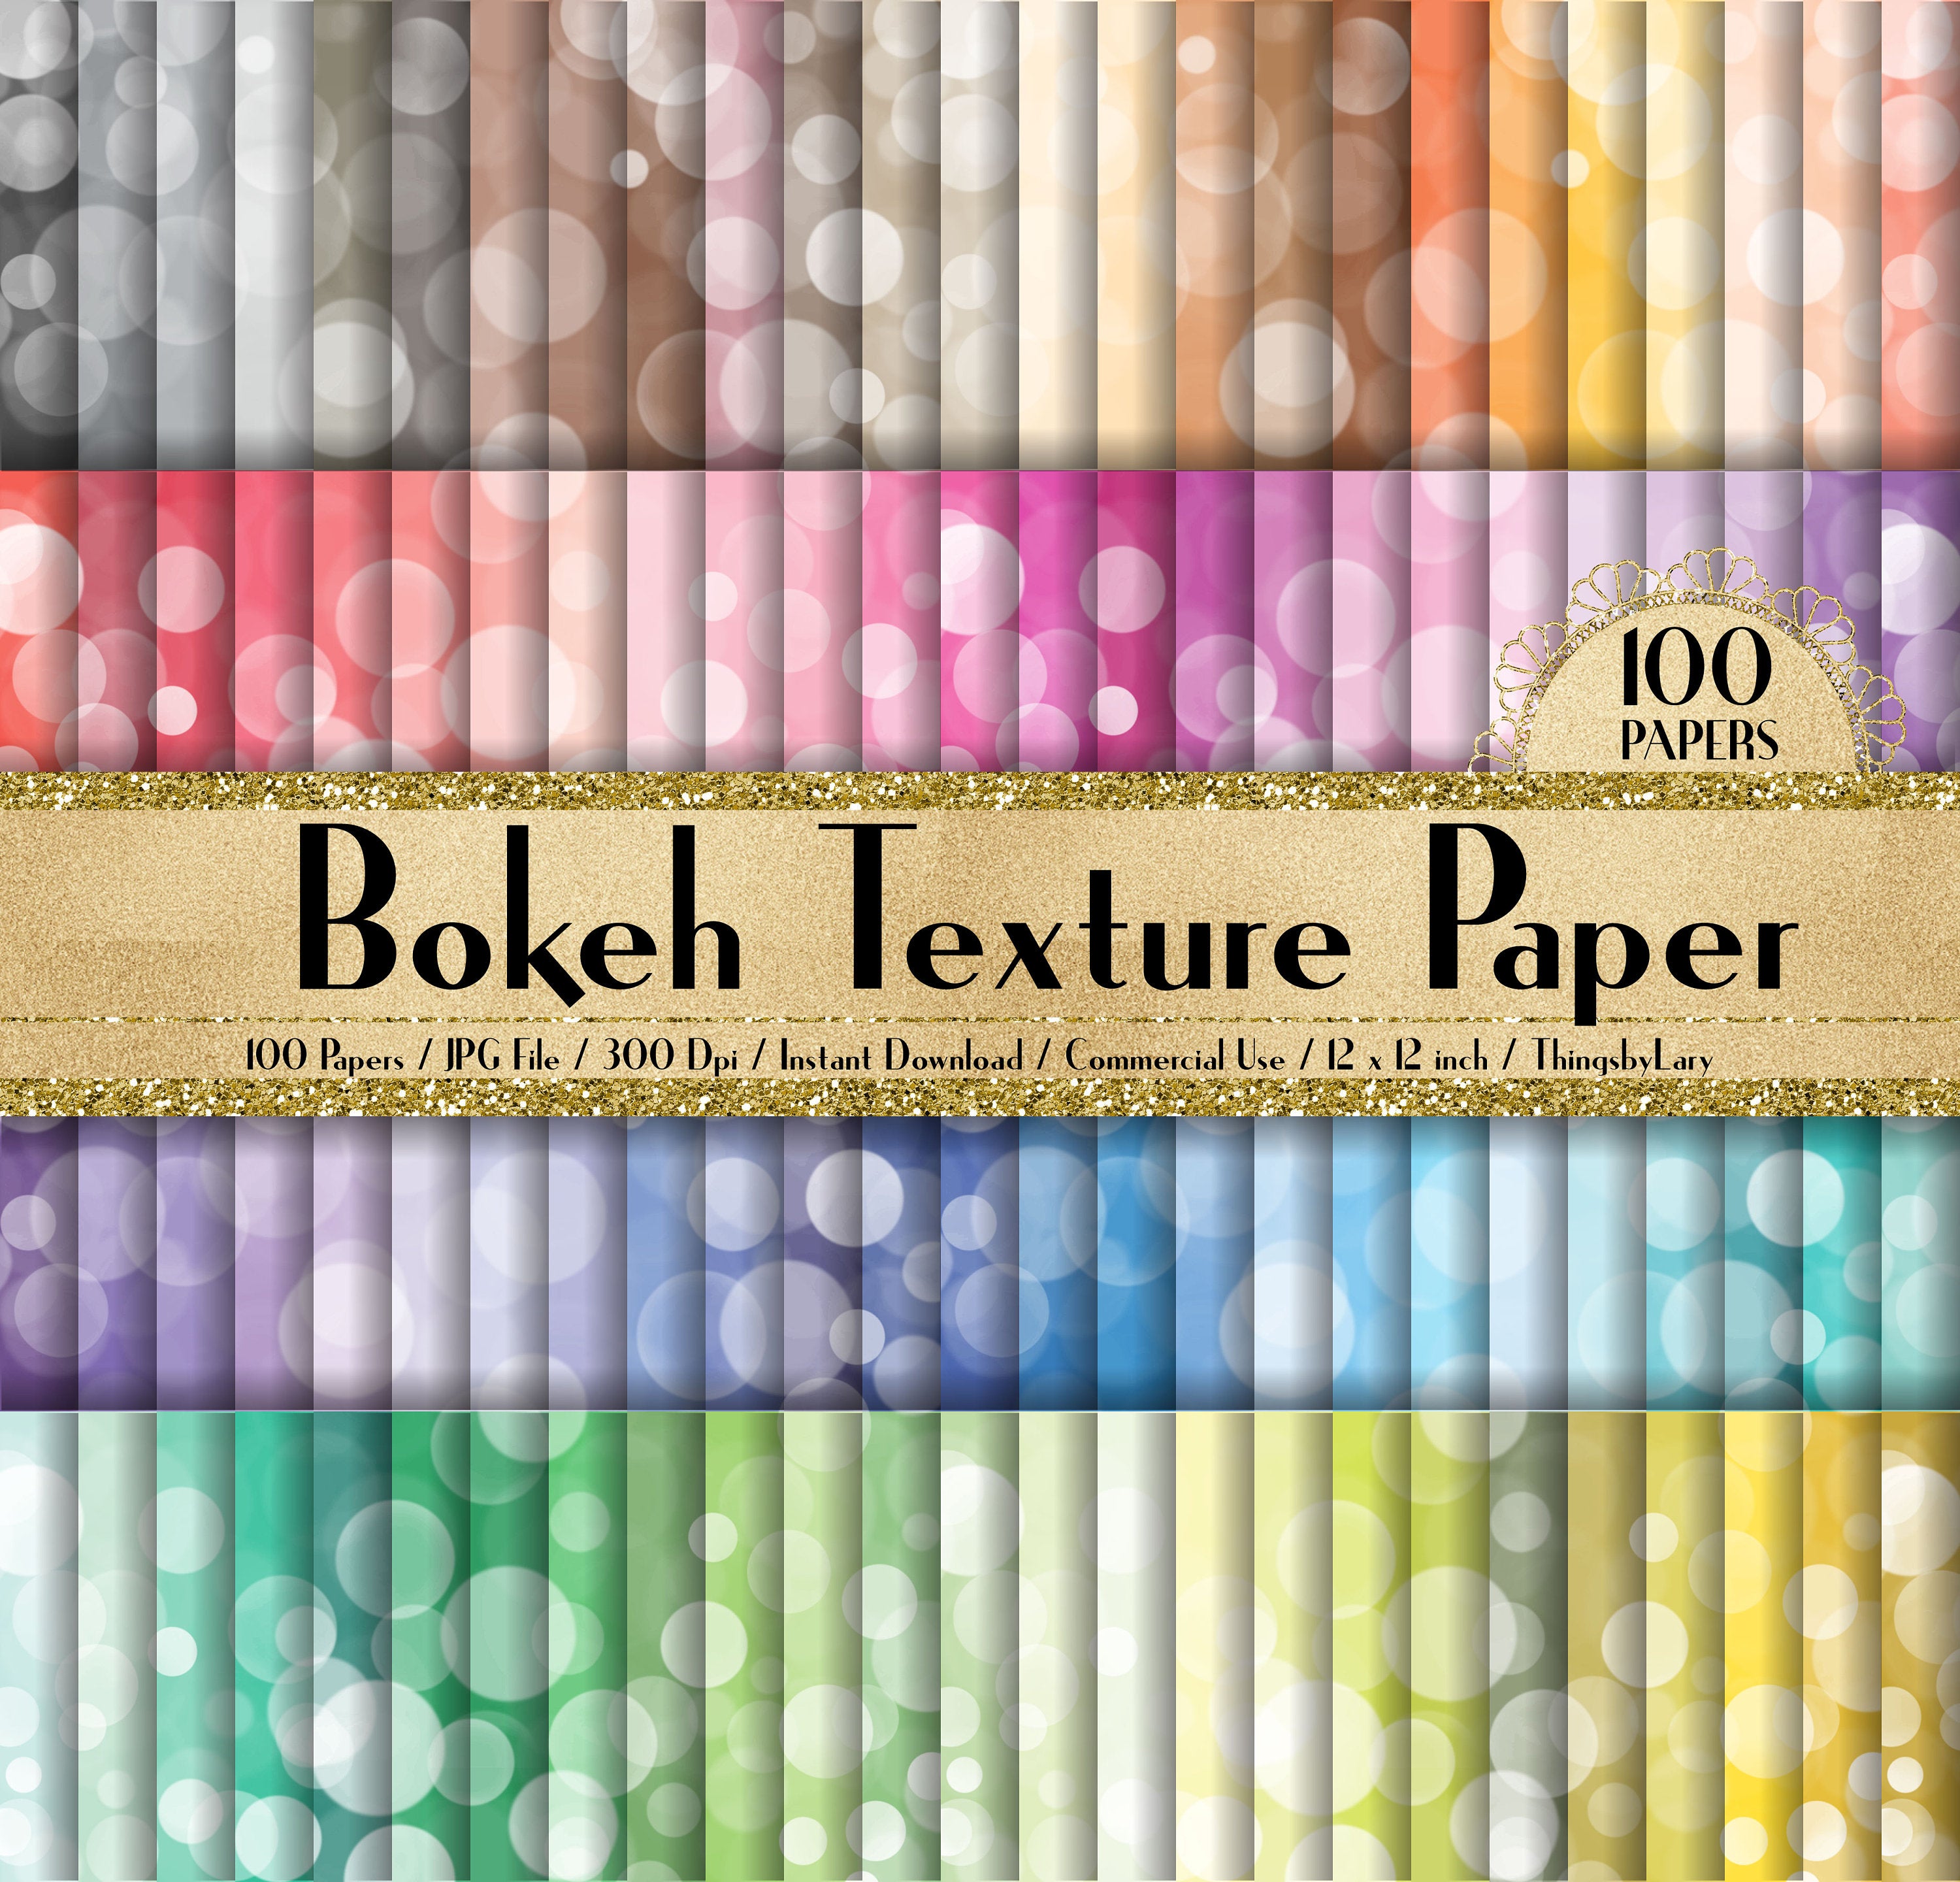 100 Bokeh Texture Papers in 12inch, 300 Dpi Planner Paper, Scrapbook Paper, Rainbow Paper,Bokeh Papers,Texture Papers